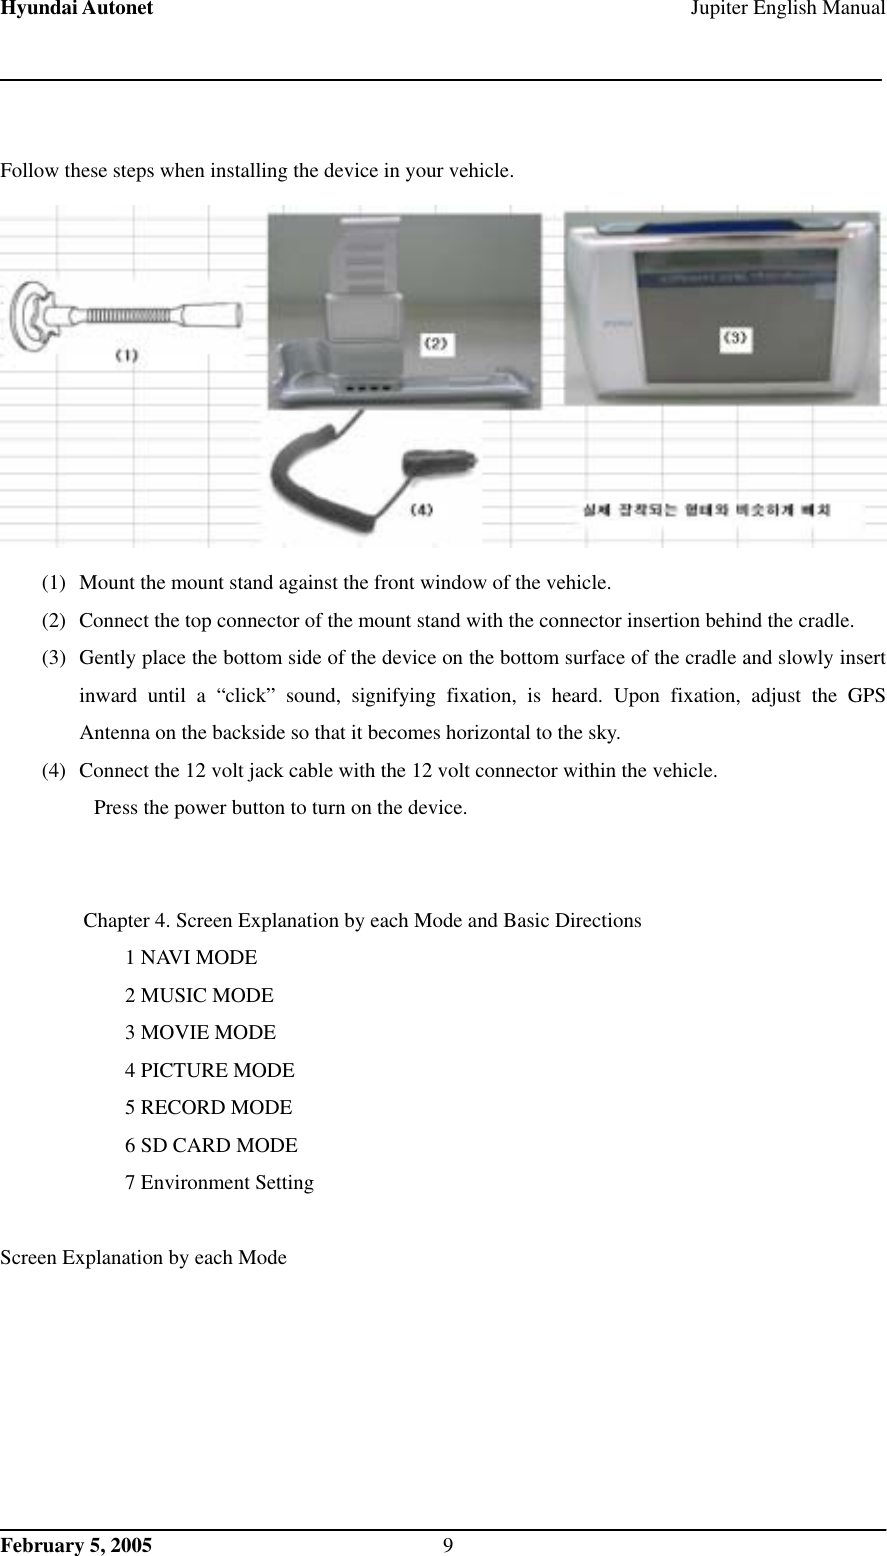 Hyundai Autonet    Jupiter English Manual  Follow these steps when installing the device in your vehicle.  (1)  Mount the mount stand against the front window of the vehicle.   (2)  Connect the top connector of the mount stand with the connector insertion behind the cradle.   (3)  Gently place the bottom side of the device on the bottom surface of the cradle and slowly insert inward until a “click” sound, signifying fixation, is heard. Upon fixation, adjust the GPS Antenna on the backside so that it becomes horizontal to the sky.   (4)  Connect the 12 volt jack cable with the 12 volt connector within the vehicle.     Press the power button to turn on the device.     Chapter 4. Screen Explanation by each Mode and Basic Directions   1 NAVI MODE 2 MUSIC MODE 3 MOVIE MODE 4 PICTURE MODE 5 RECORD MODE 6 SD CARD MODE 7 Environment Setting    Screen Explanation by each Mode   February 5, 2005  9 